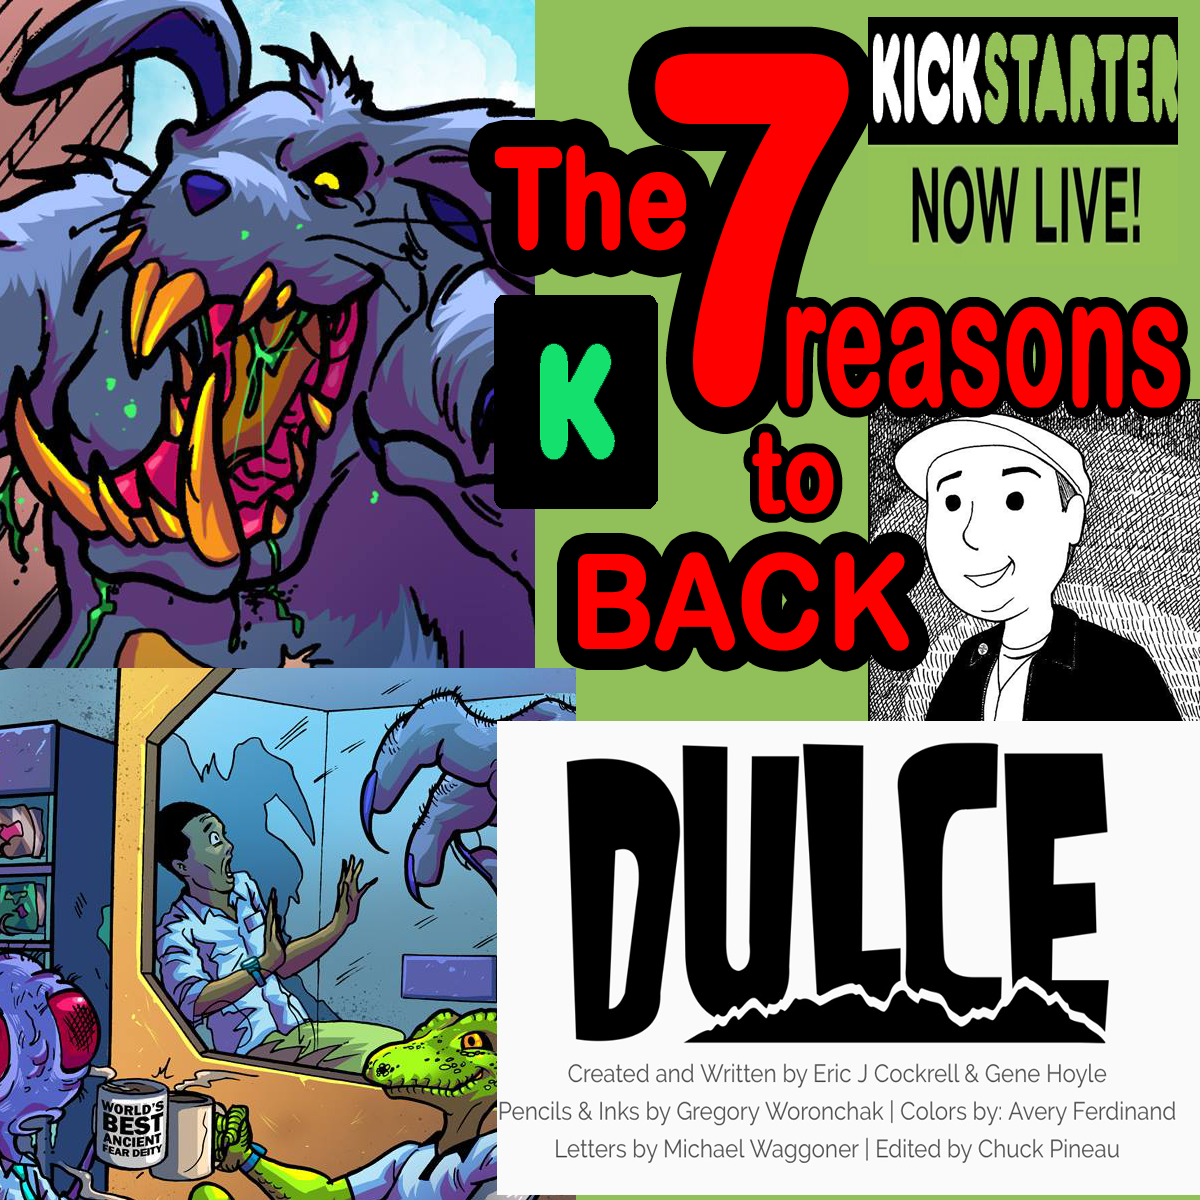 Eric Cockrell gives us The 7 REASONS to BACK DULCE